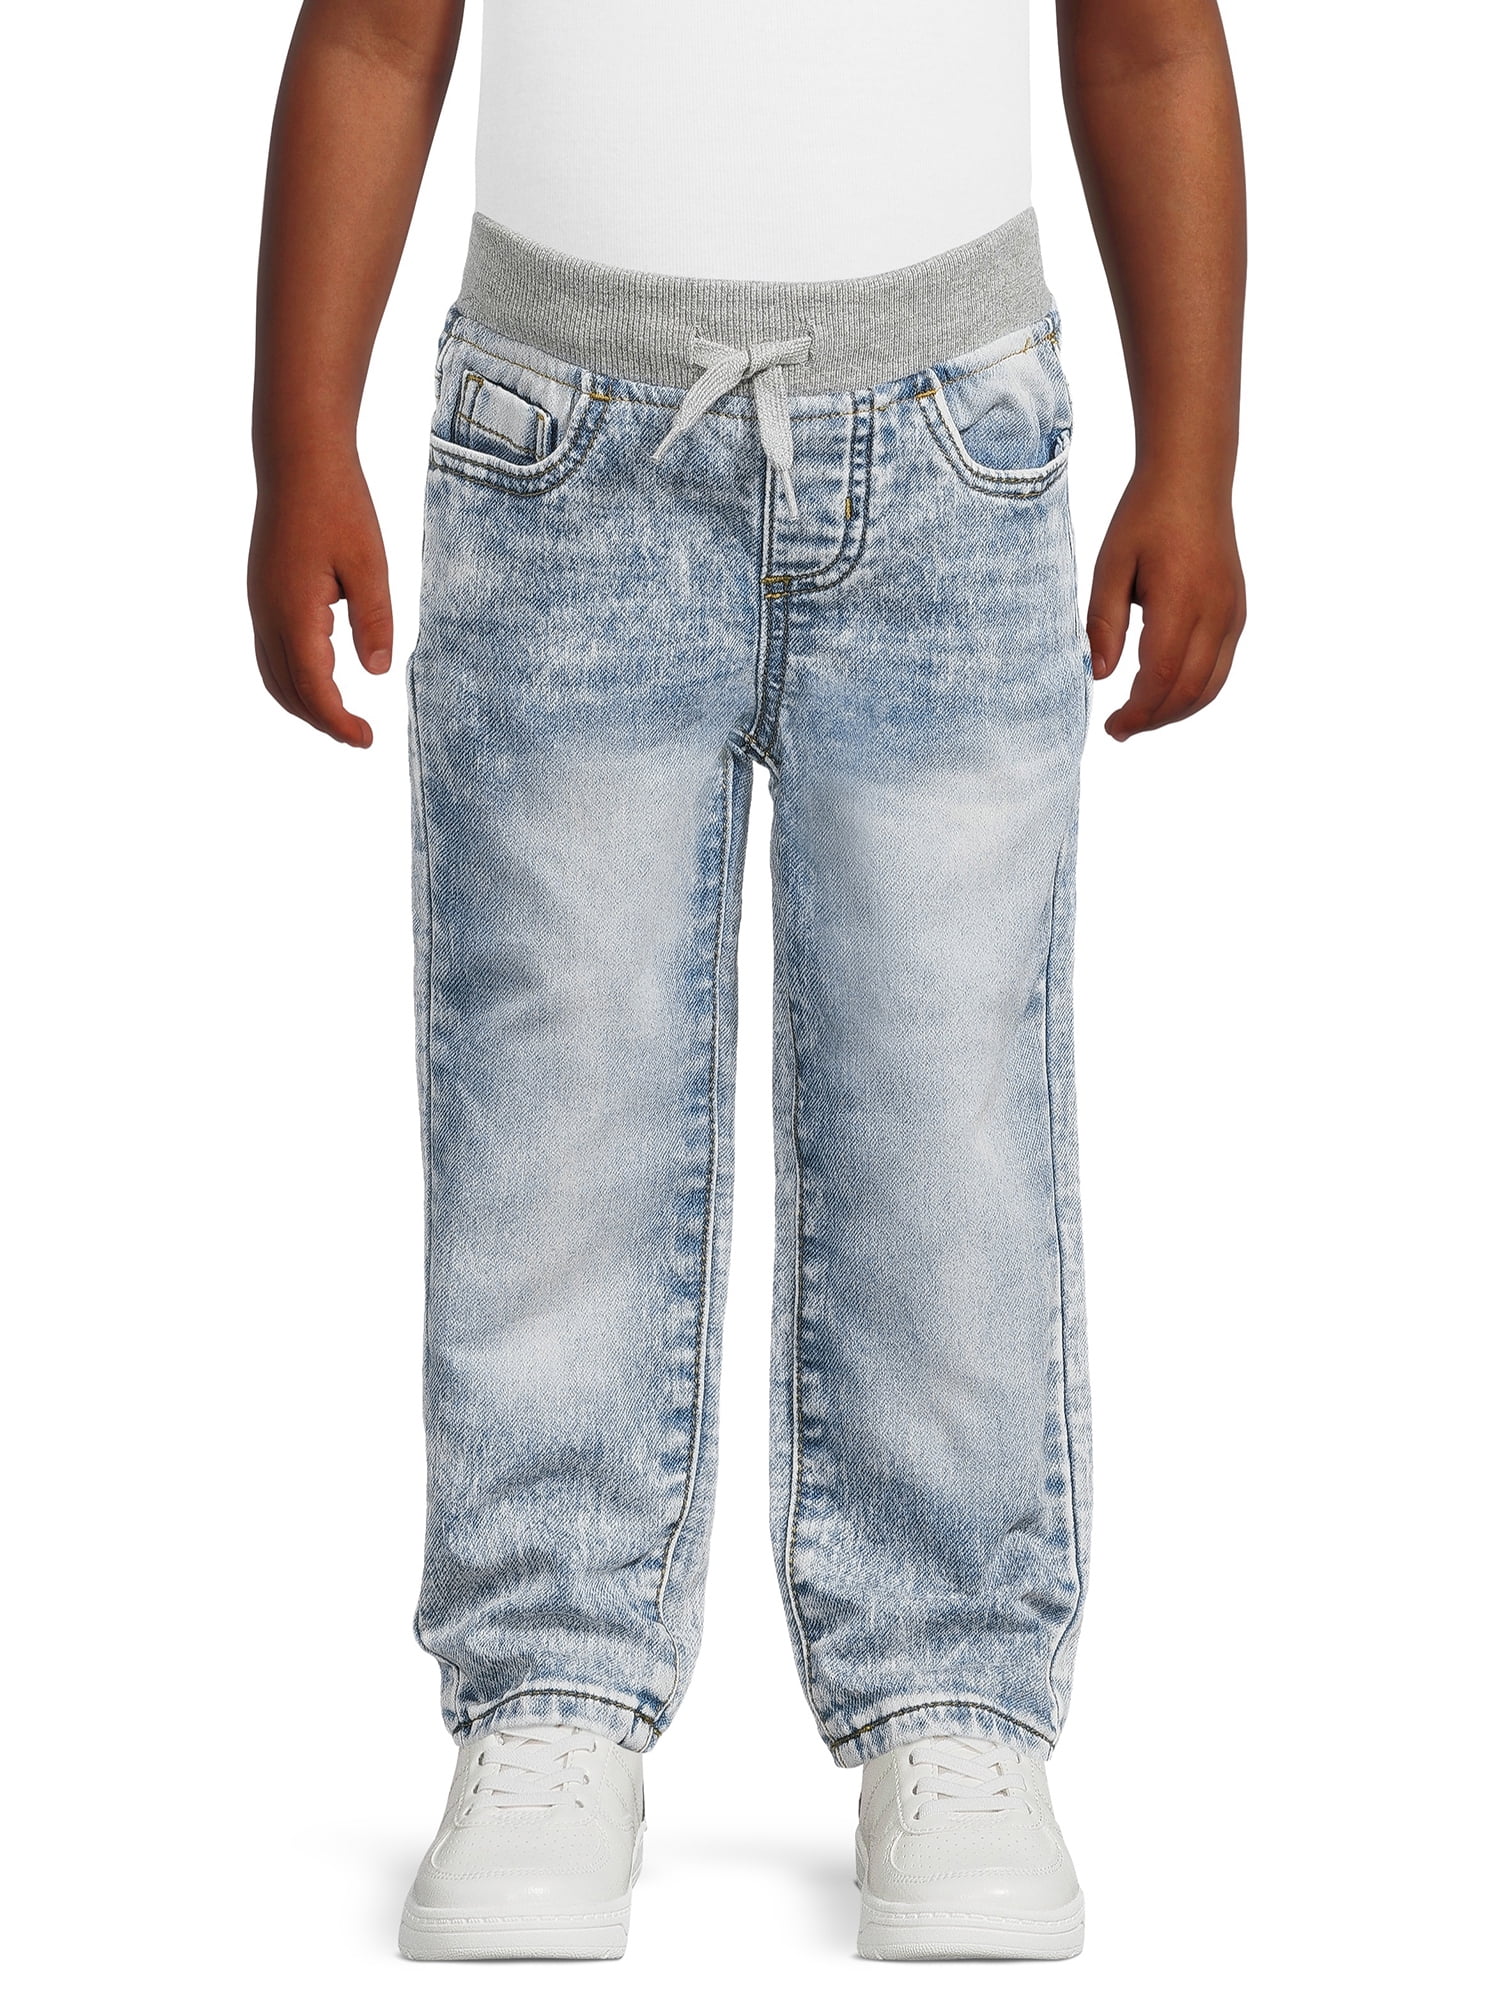 Wonder Nation Baby and Toddler Boys' Knit Denim Jeans, Sizes 12M-5T